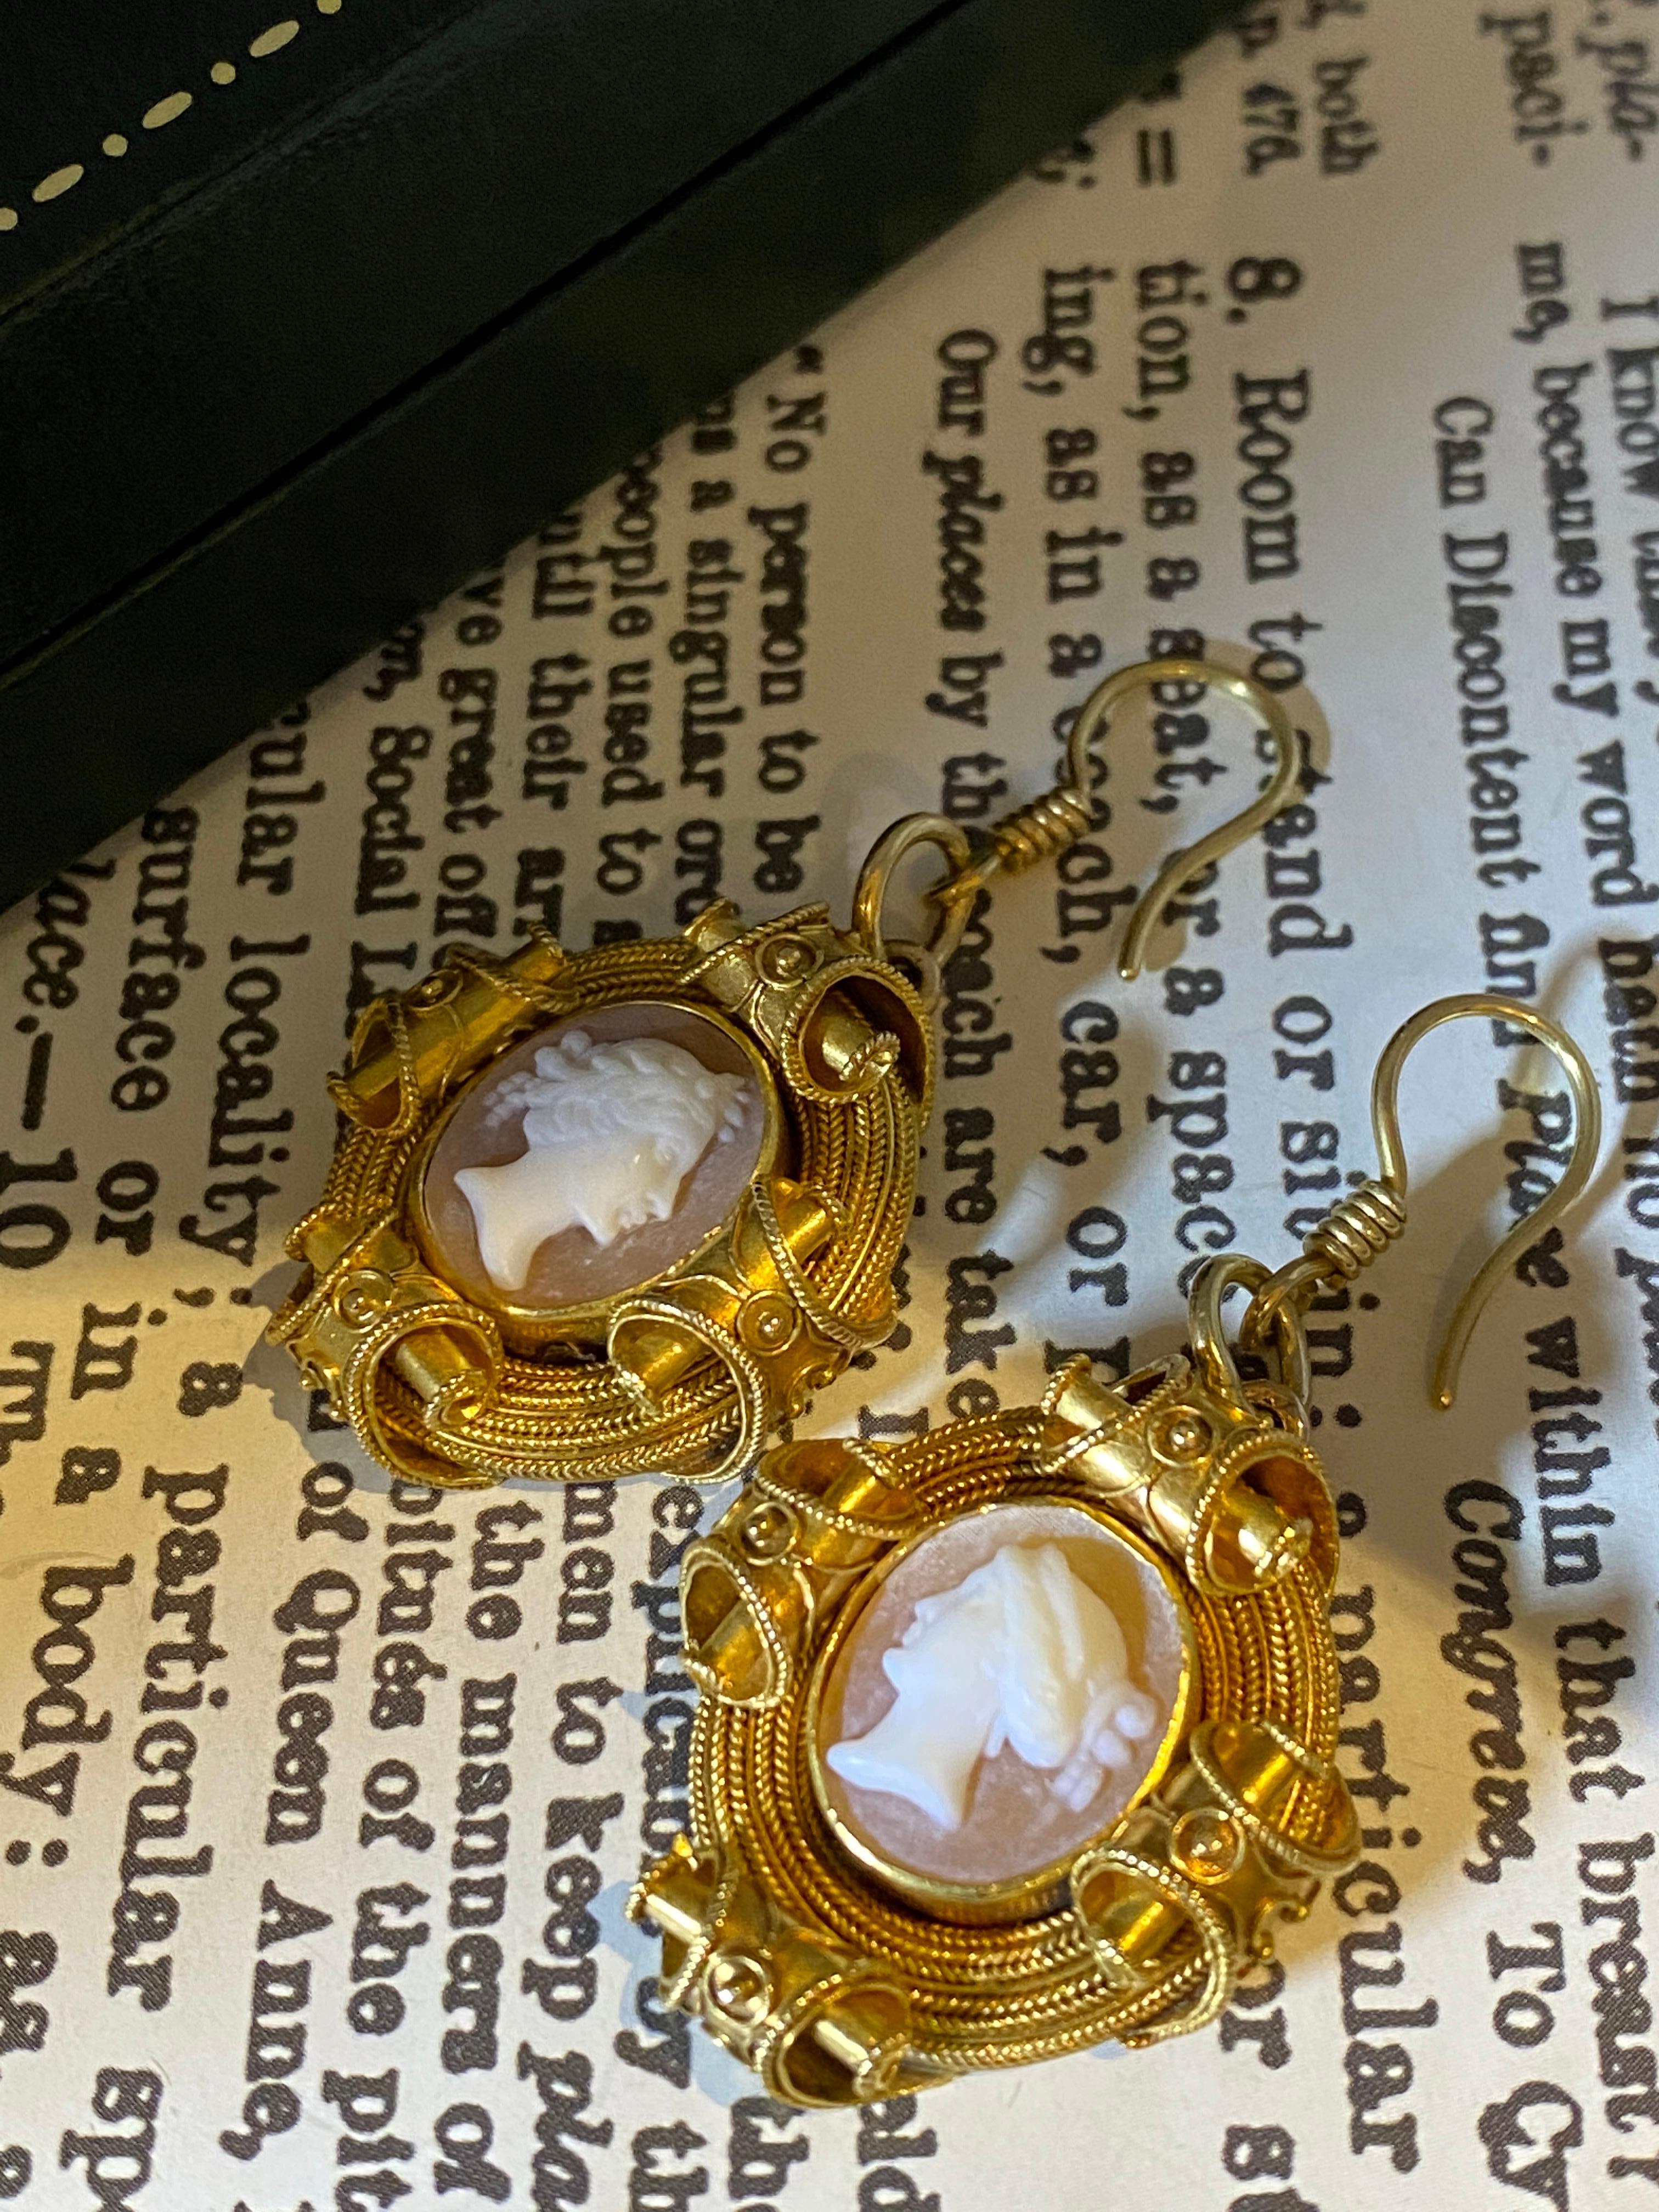 Meticulously crafted in 18K yellow gold 
this magnificent Pair of Drop / Pendant Earrings
date from mid-Victorian era & 
is a fine & rare example of Antique Etruscan Revival jewelry.

Etruscan Revival pieces reflect the fascination of Victorian era